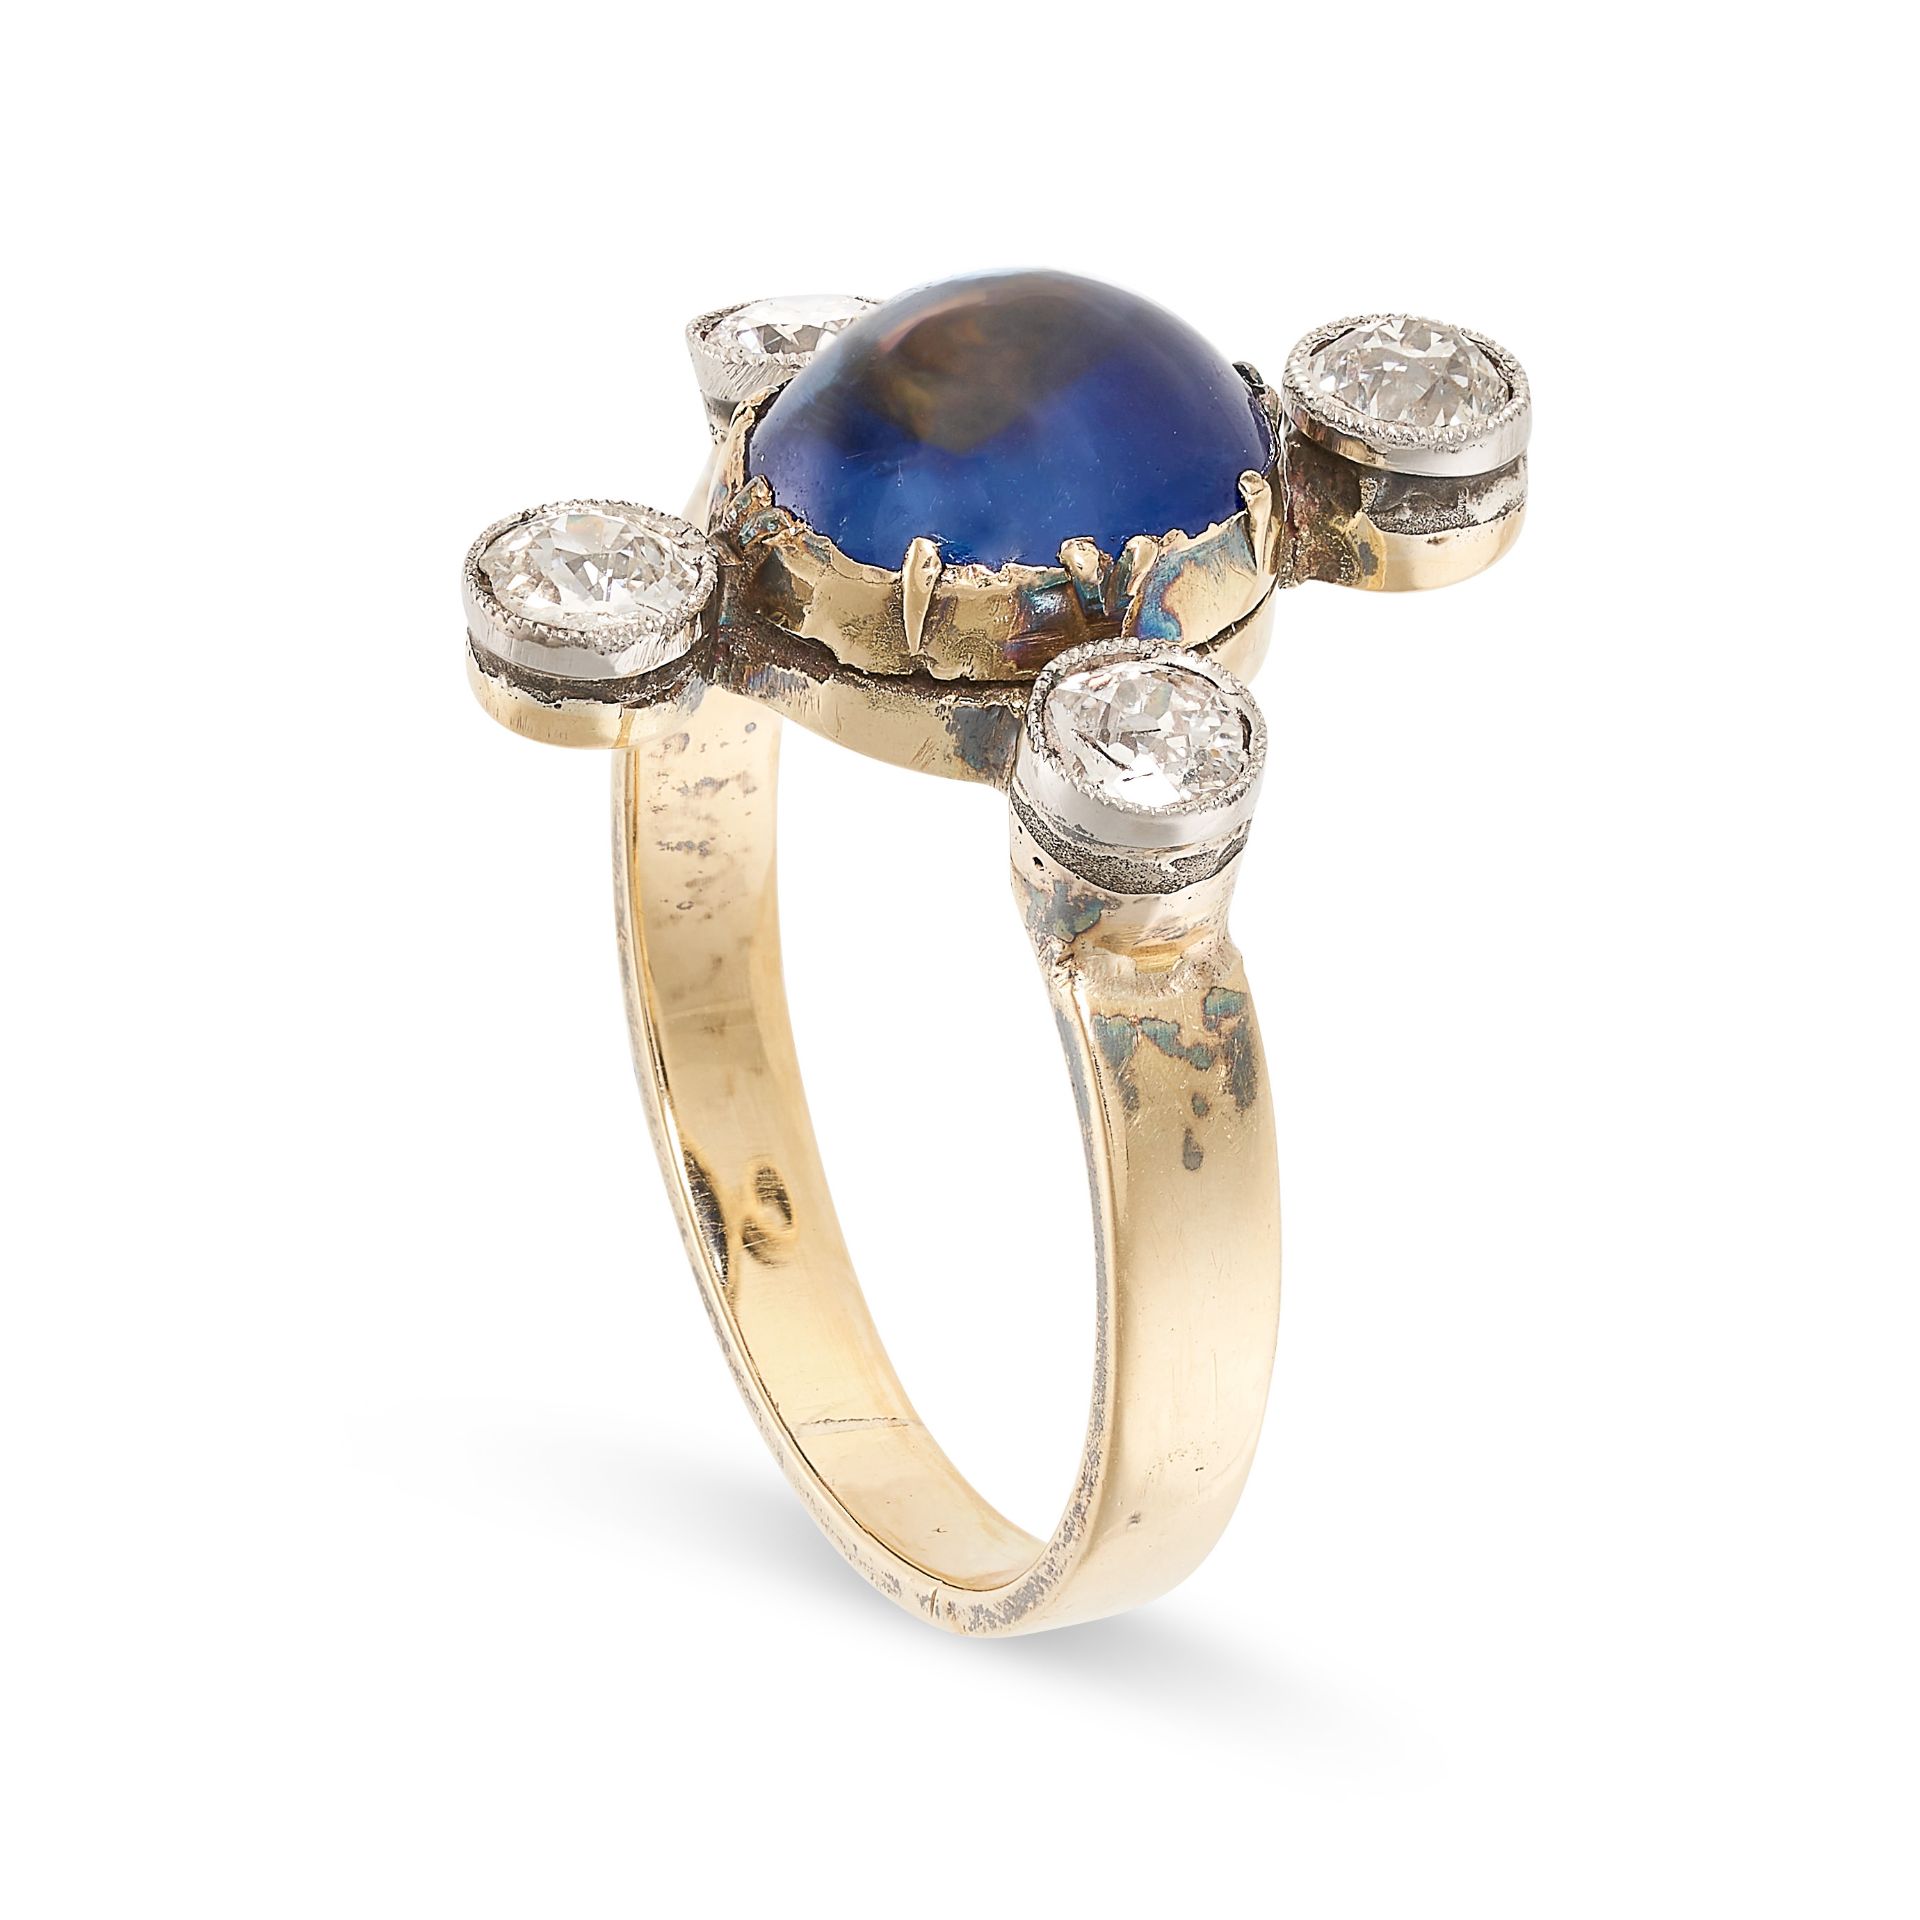 AN ANTIQUE SAPPHIRE AND DIAMOND RING set with a cabochon sapphire of 3.60 carats, accented by four - Image 2 of 2